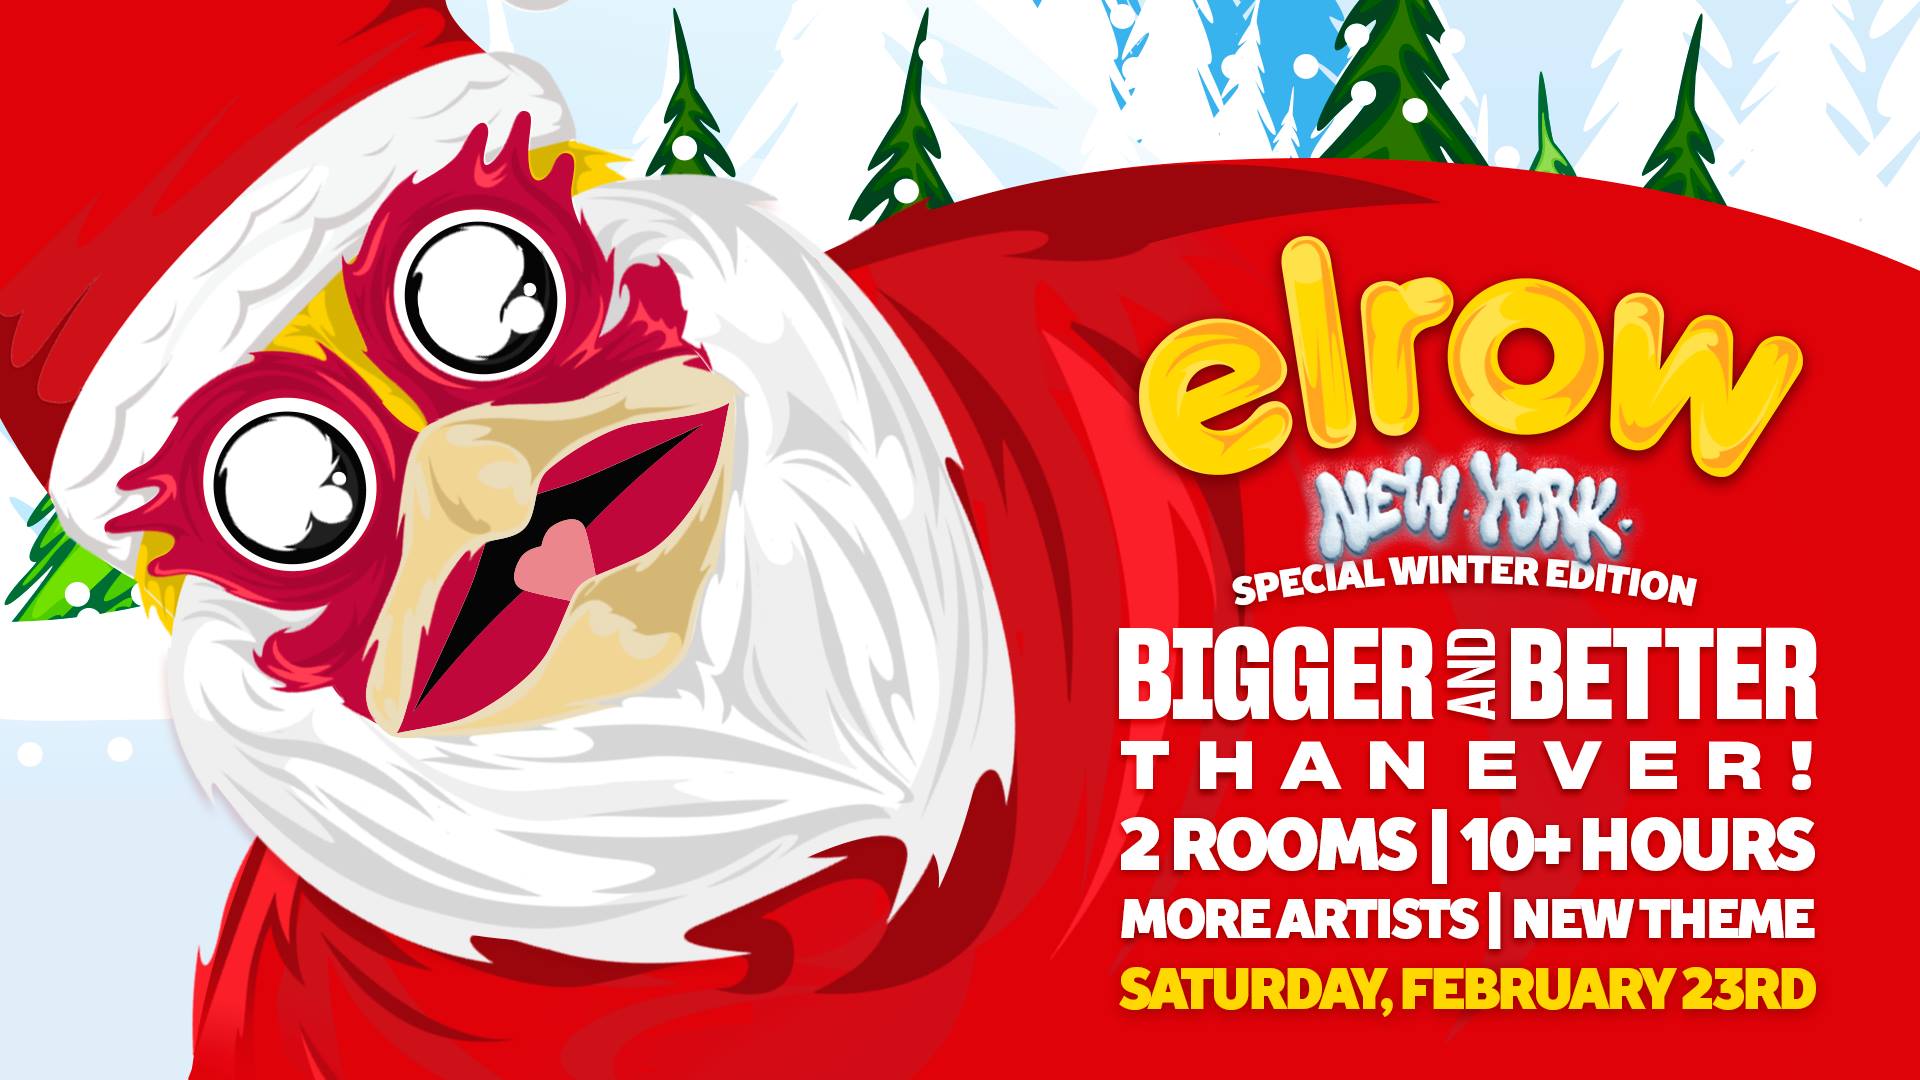 elrow new york special winter edition